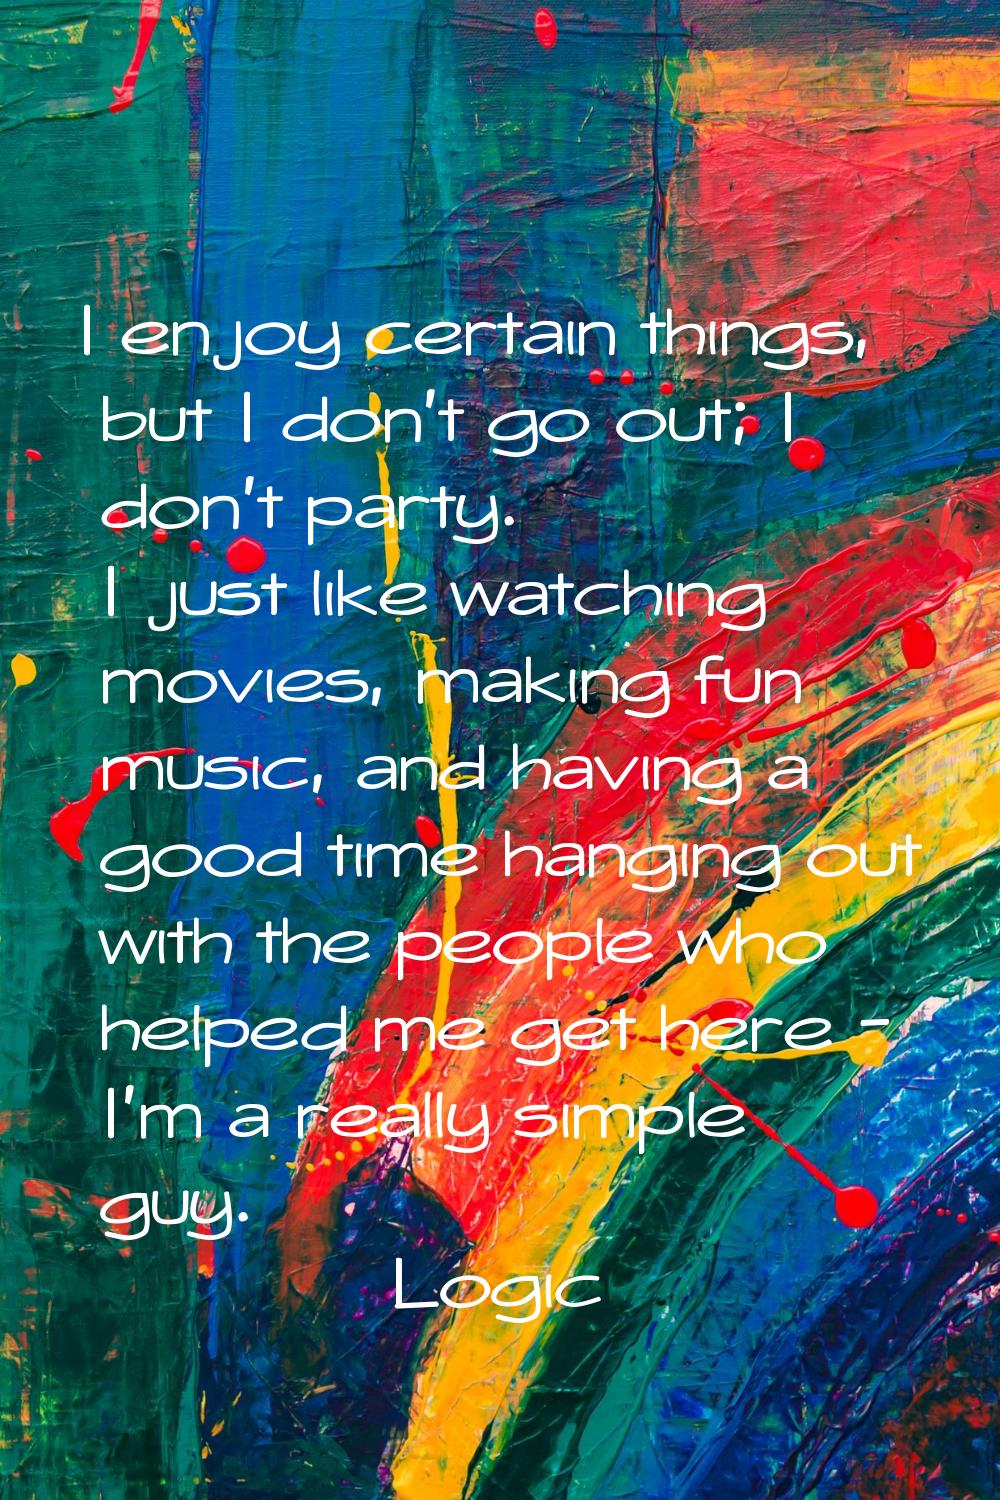 I enjoy certain things, but I don't go out; I don't party. I just like watching movies, making fun 